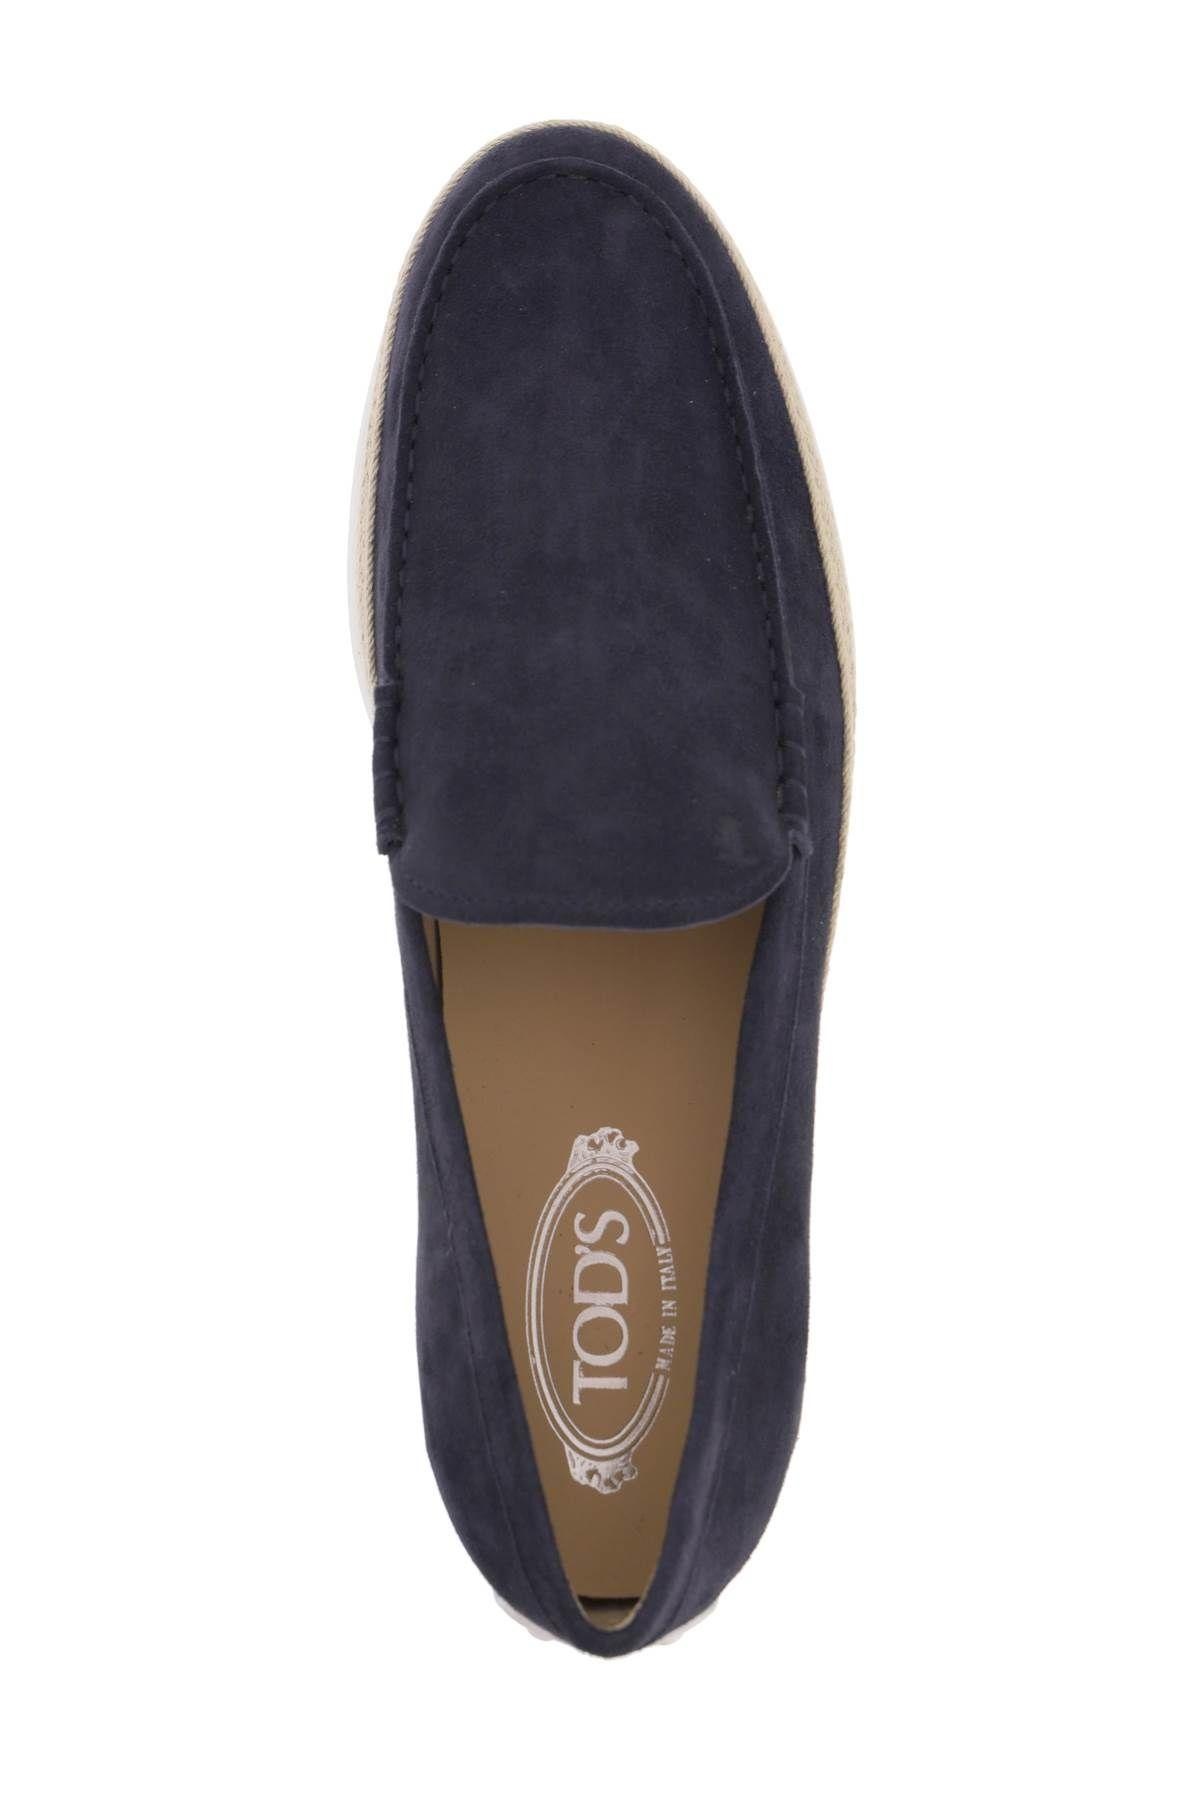 Suede slip-on with rafia insert Tod's - 3